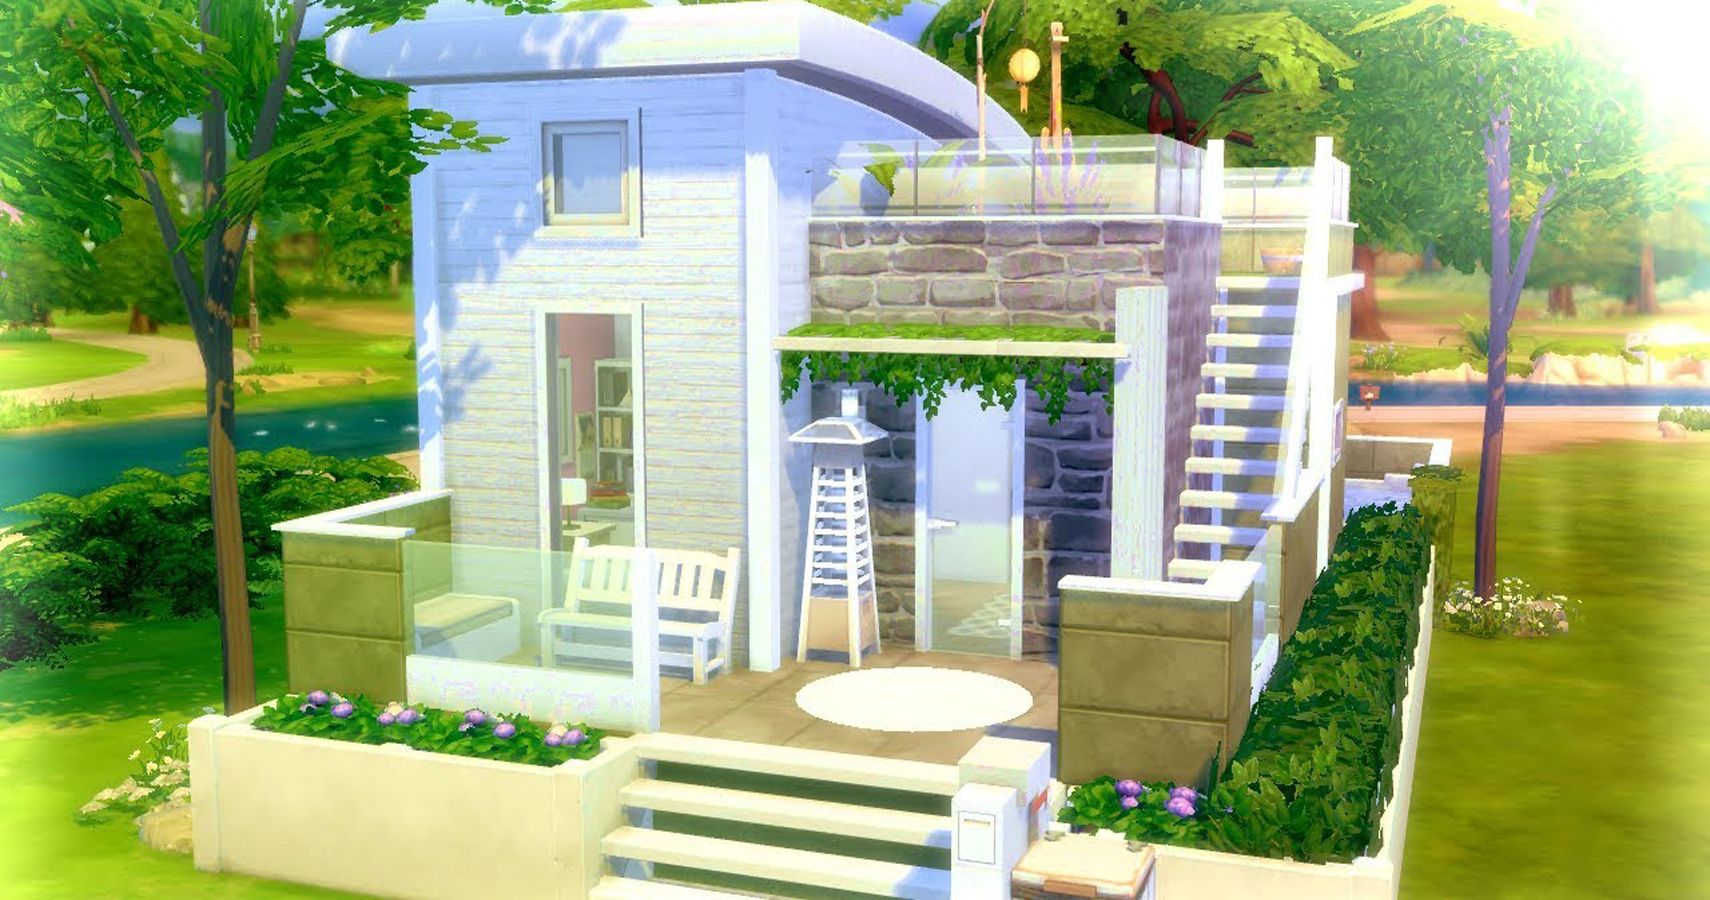 Sims 4: 15 Completely Functional Tiny Homes (That Use No Custom Content)